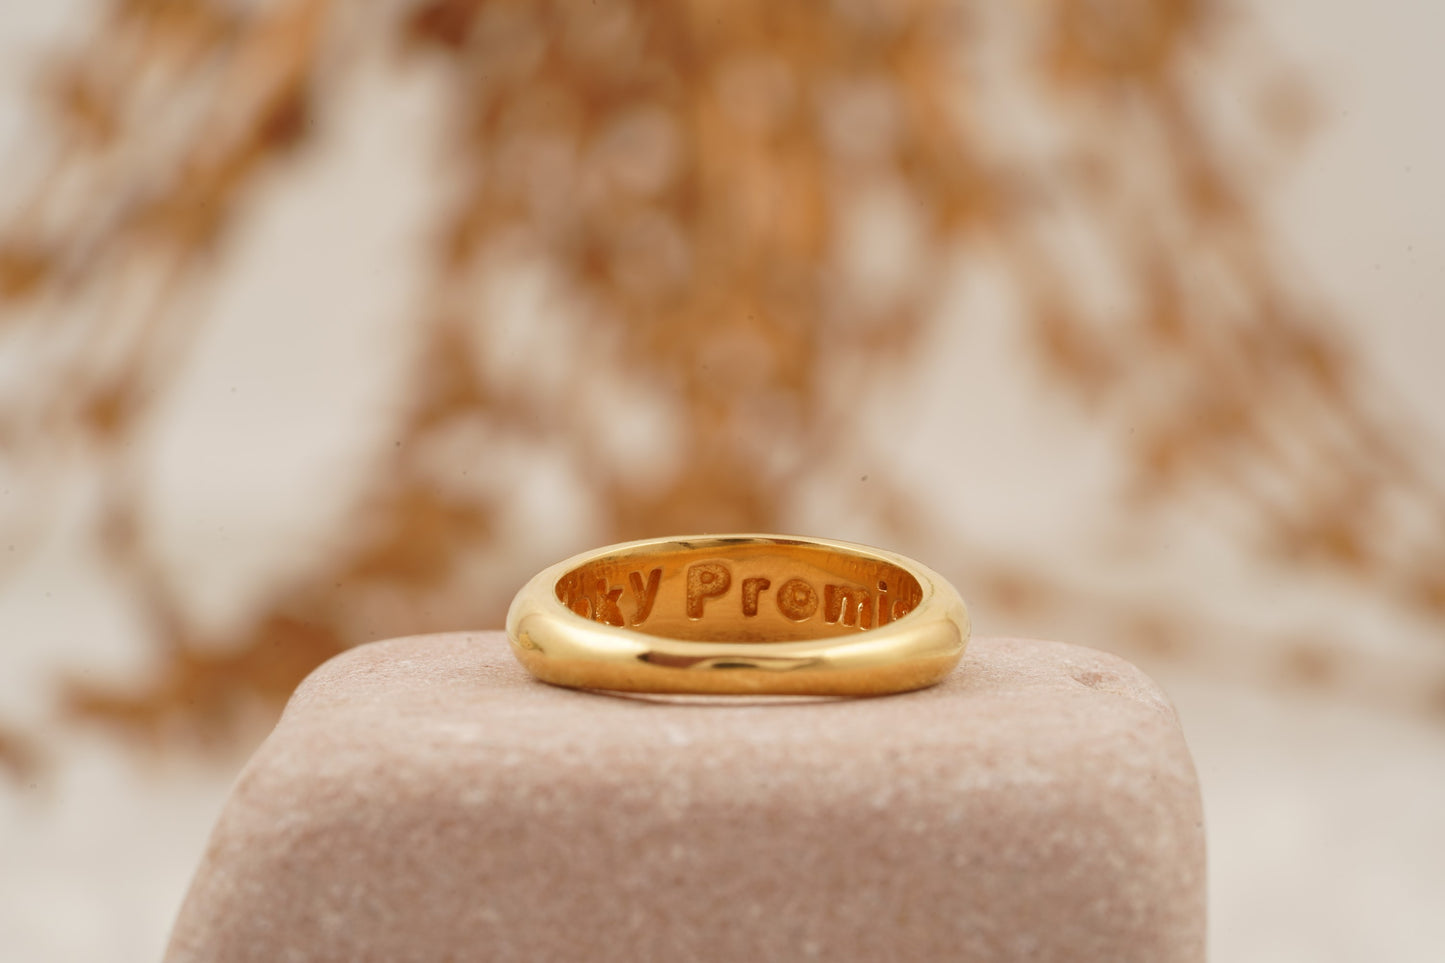 Pinky Promise Couples Stacking 14k Gold Filled Rings